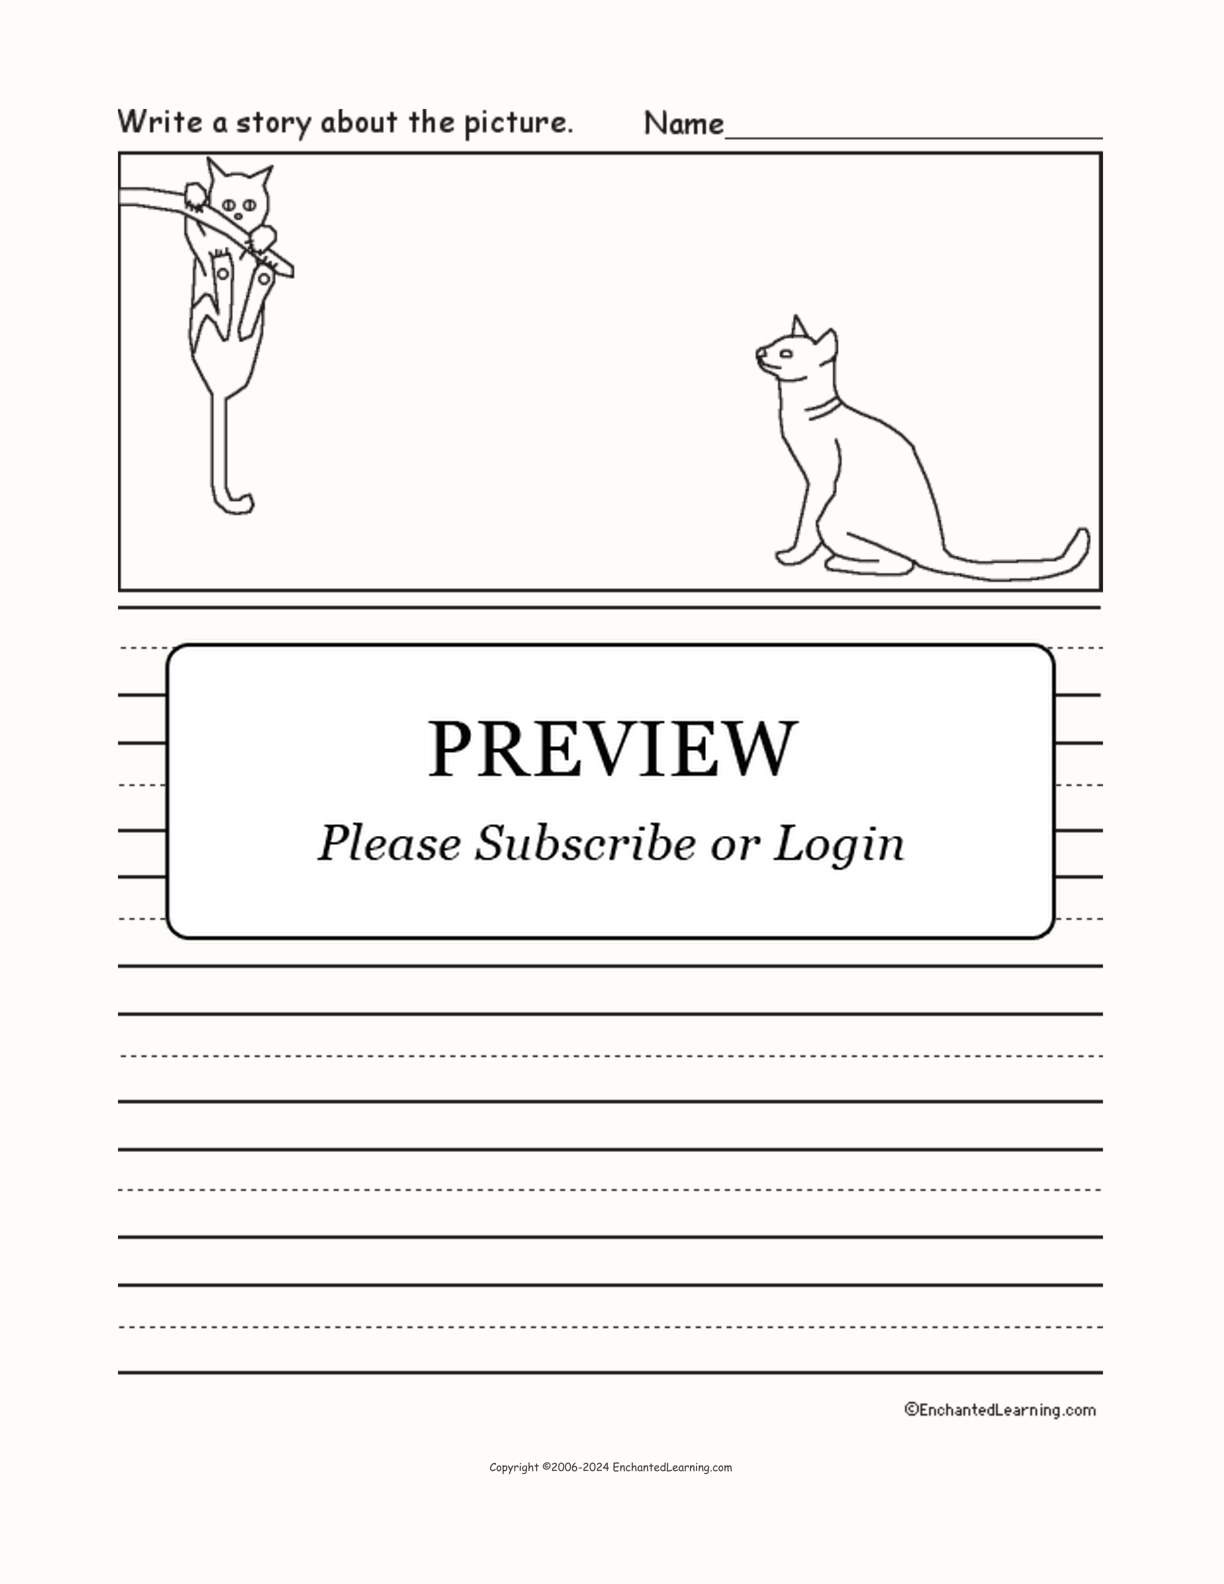 Picture Prompts - Cat Scene interactive worksheet page 1